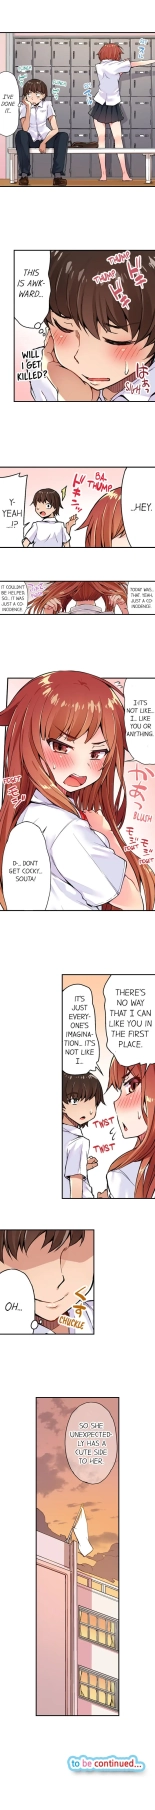 Traditional Job of Washing Girls' Body Ch. 1-189 : page 82